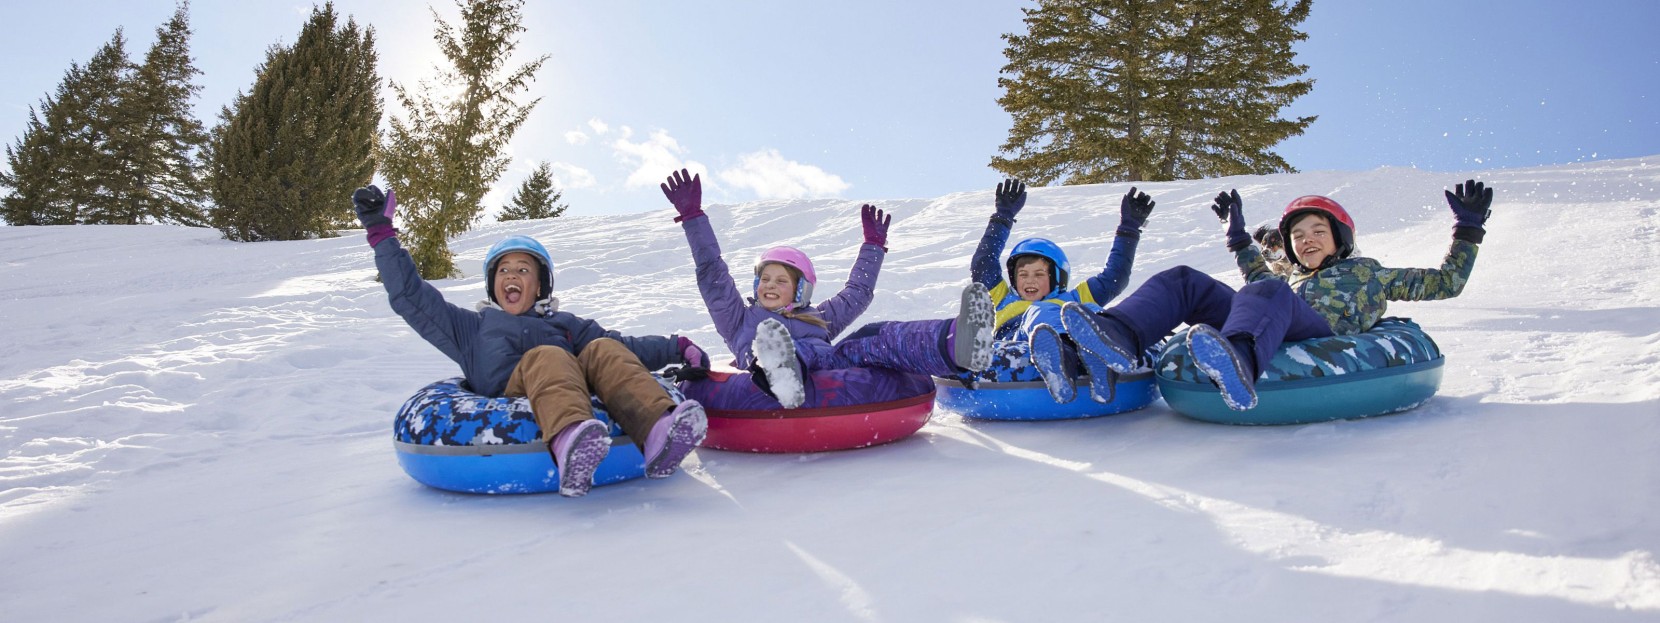 4 kids snow tubing together down a hill having fun with their hands in the air.